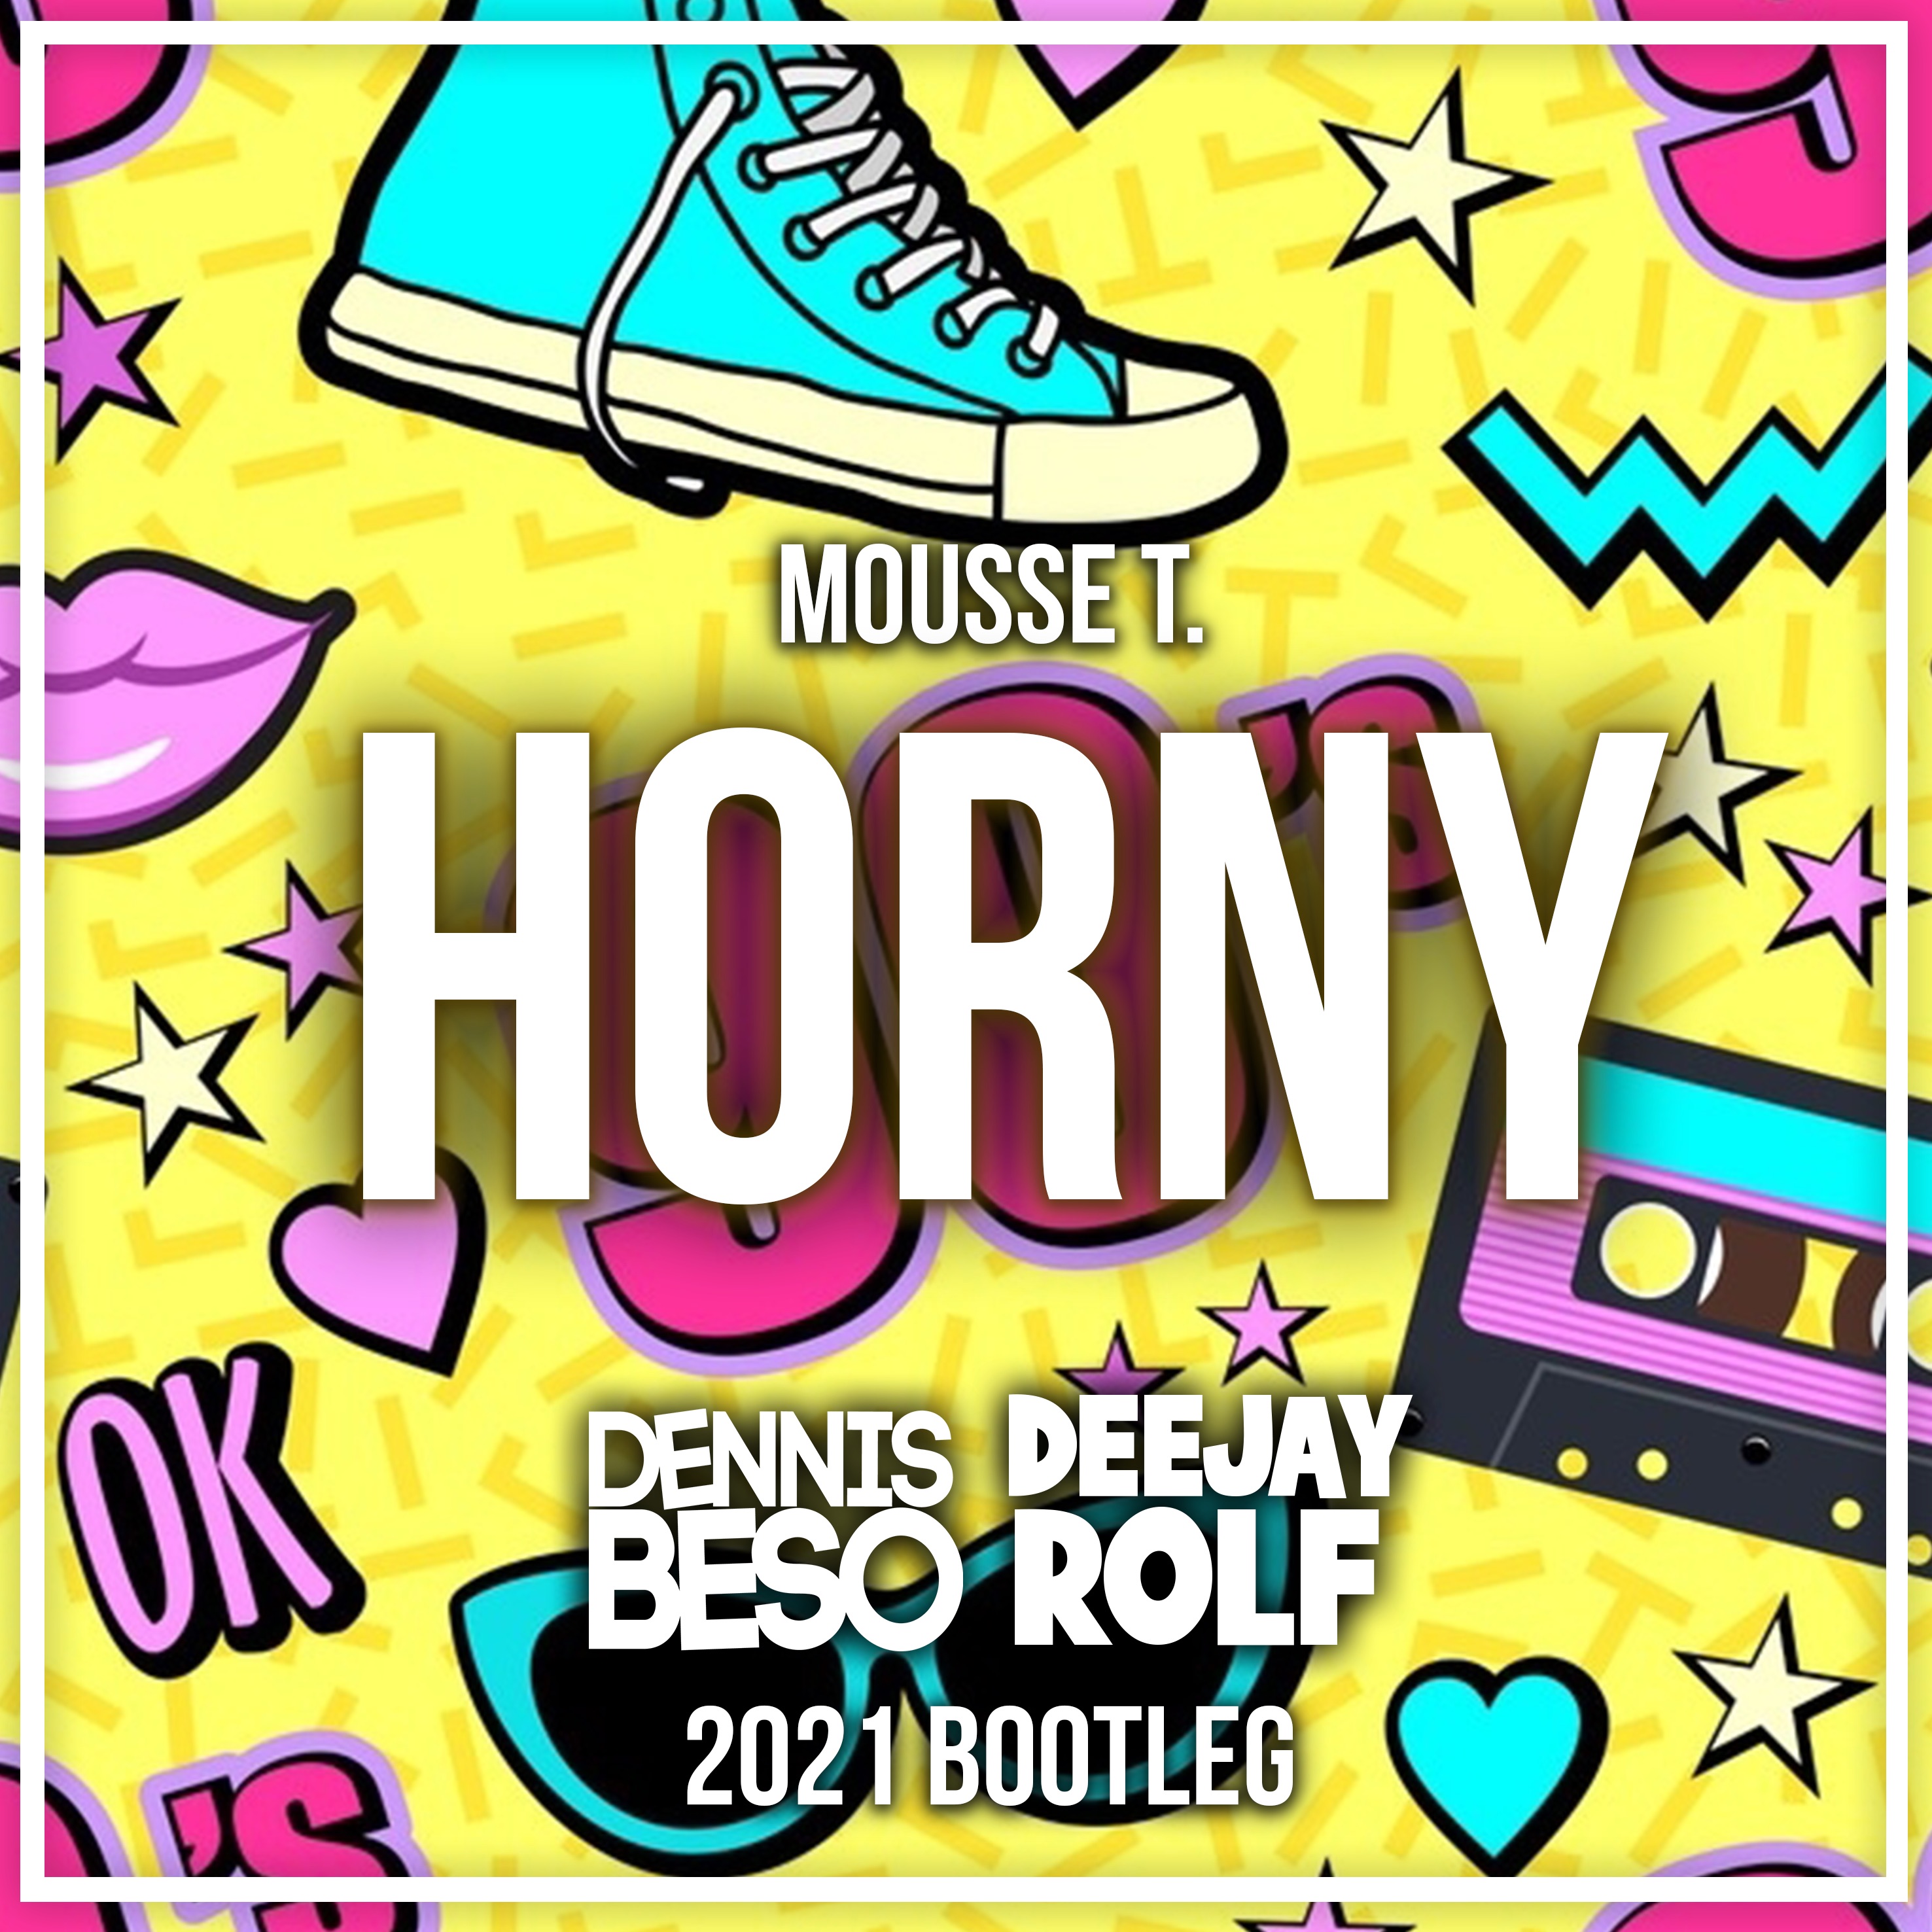 Horny 98 Dennis Beso And Dj Rolf Bootleg By Mousse T Feat Hot N